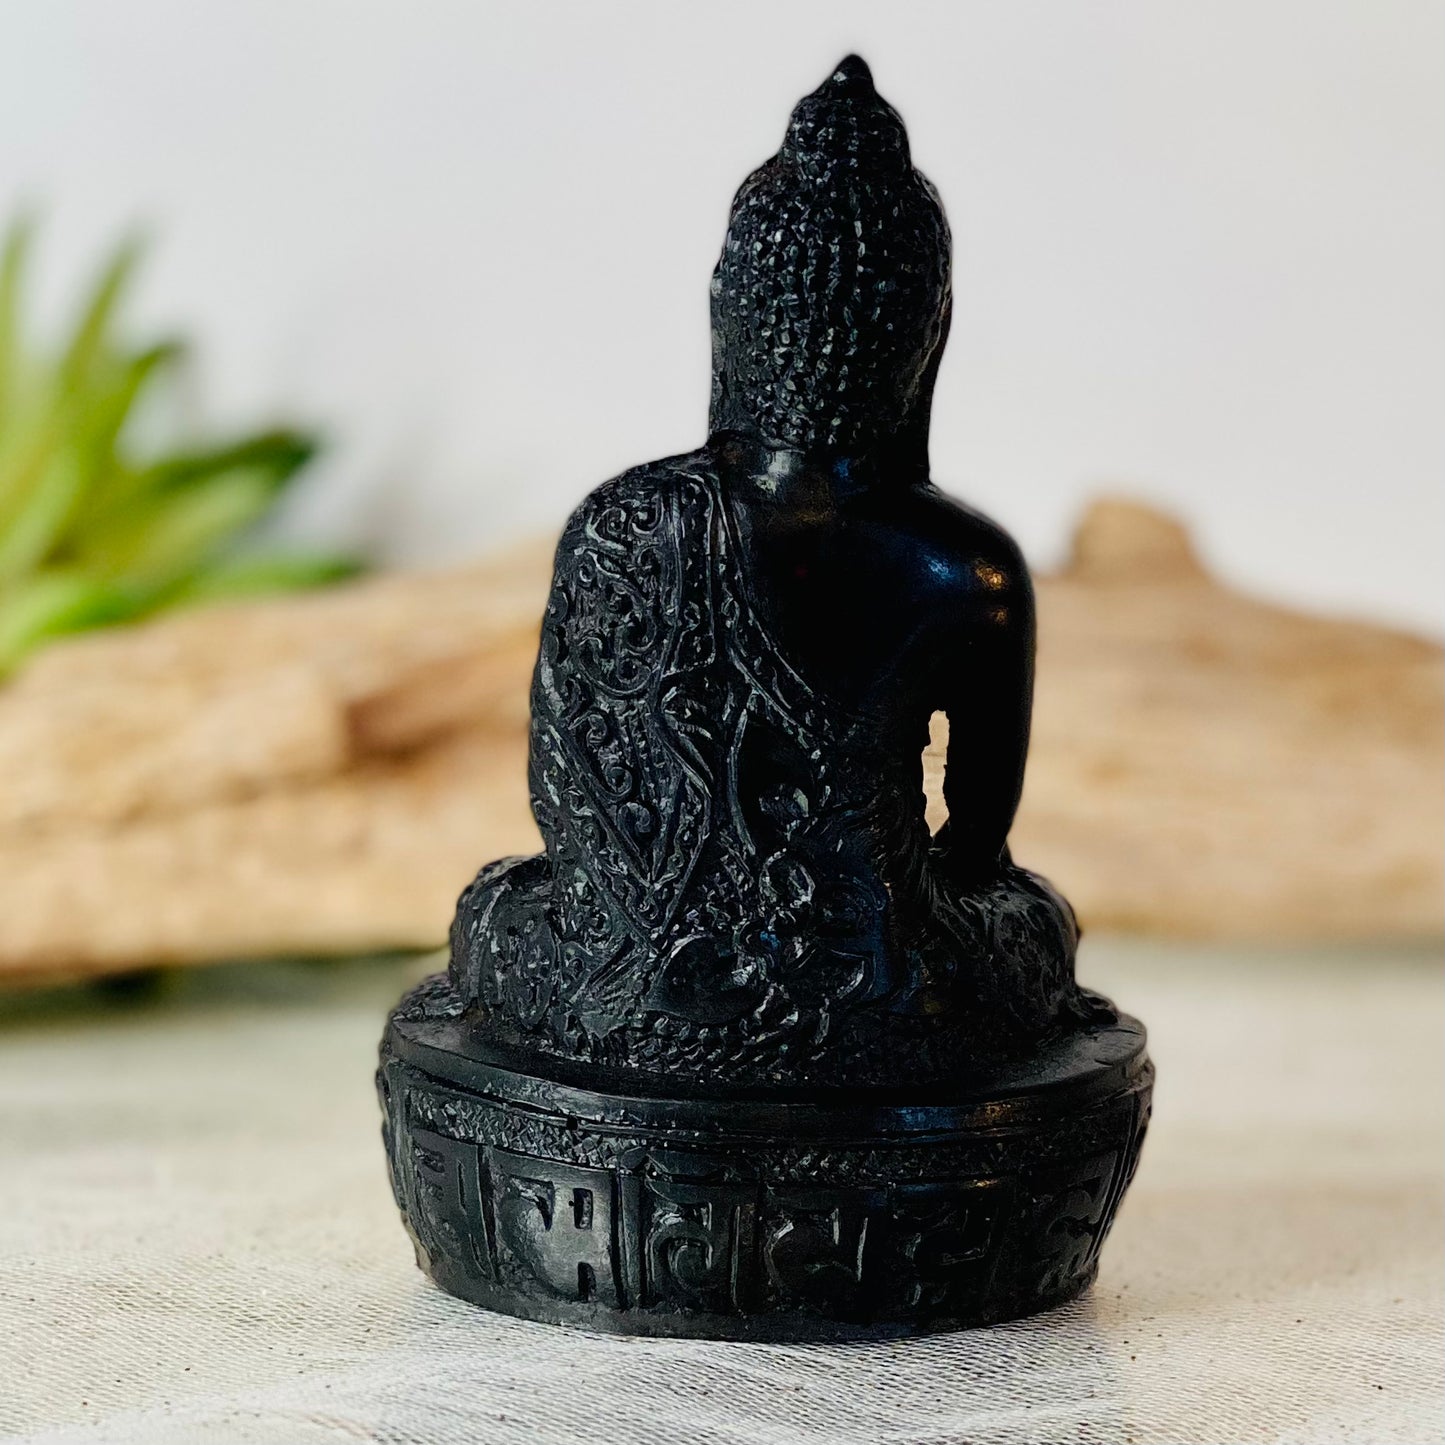 Sacred Serenity: Black Buddha Statue for Your Altar